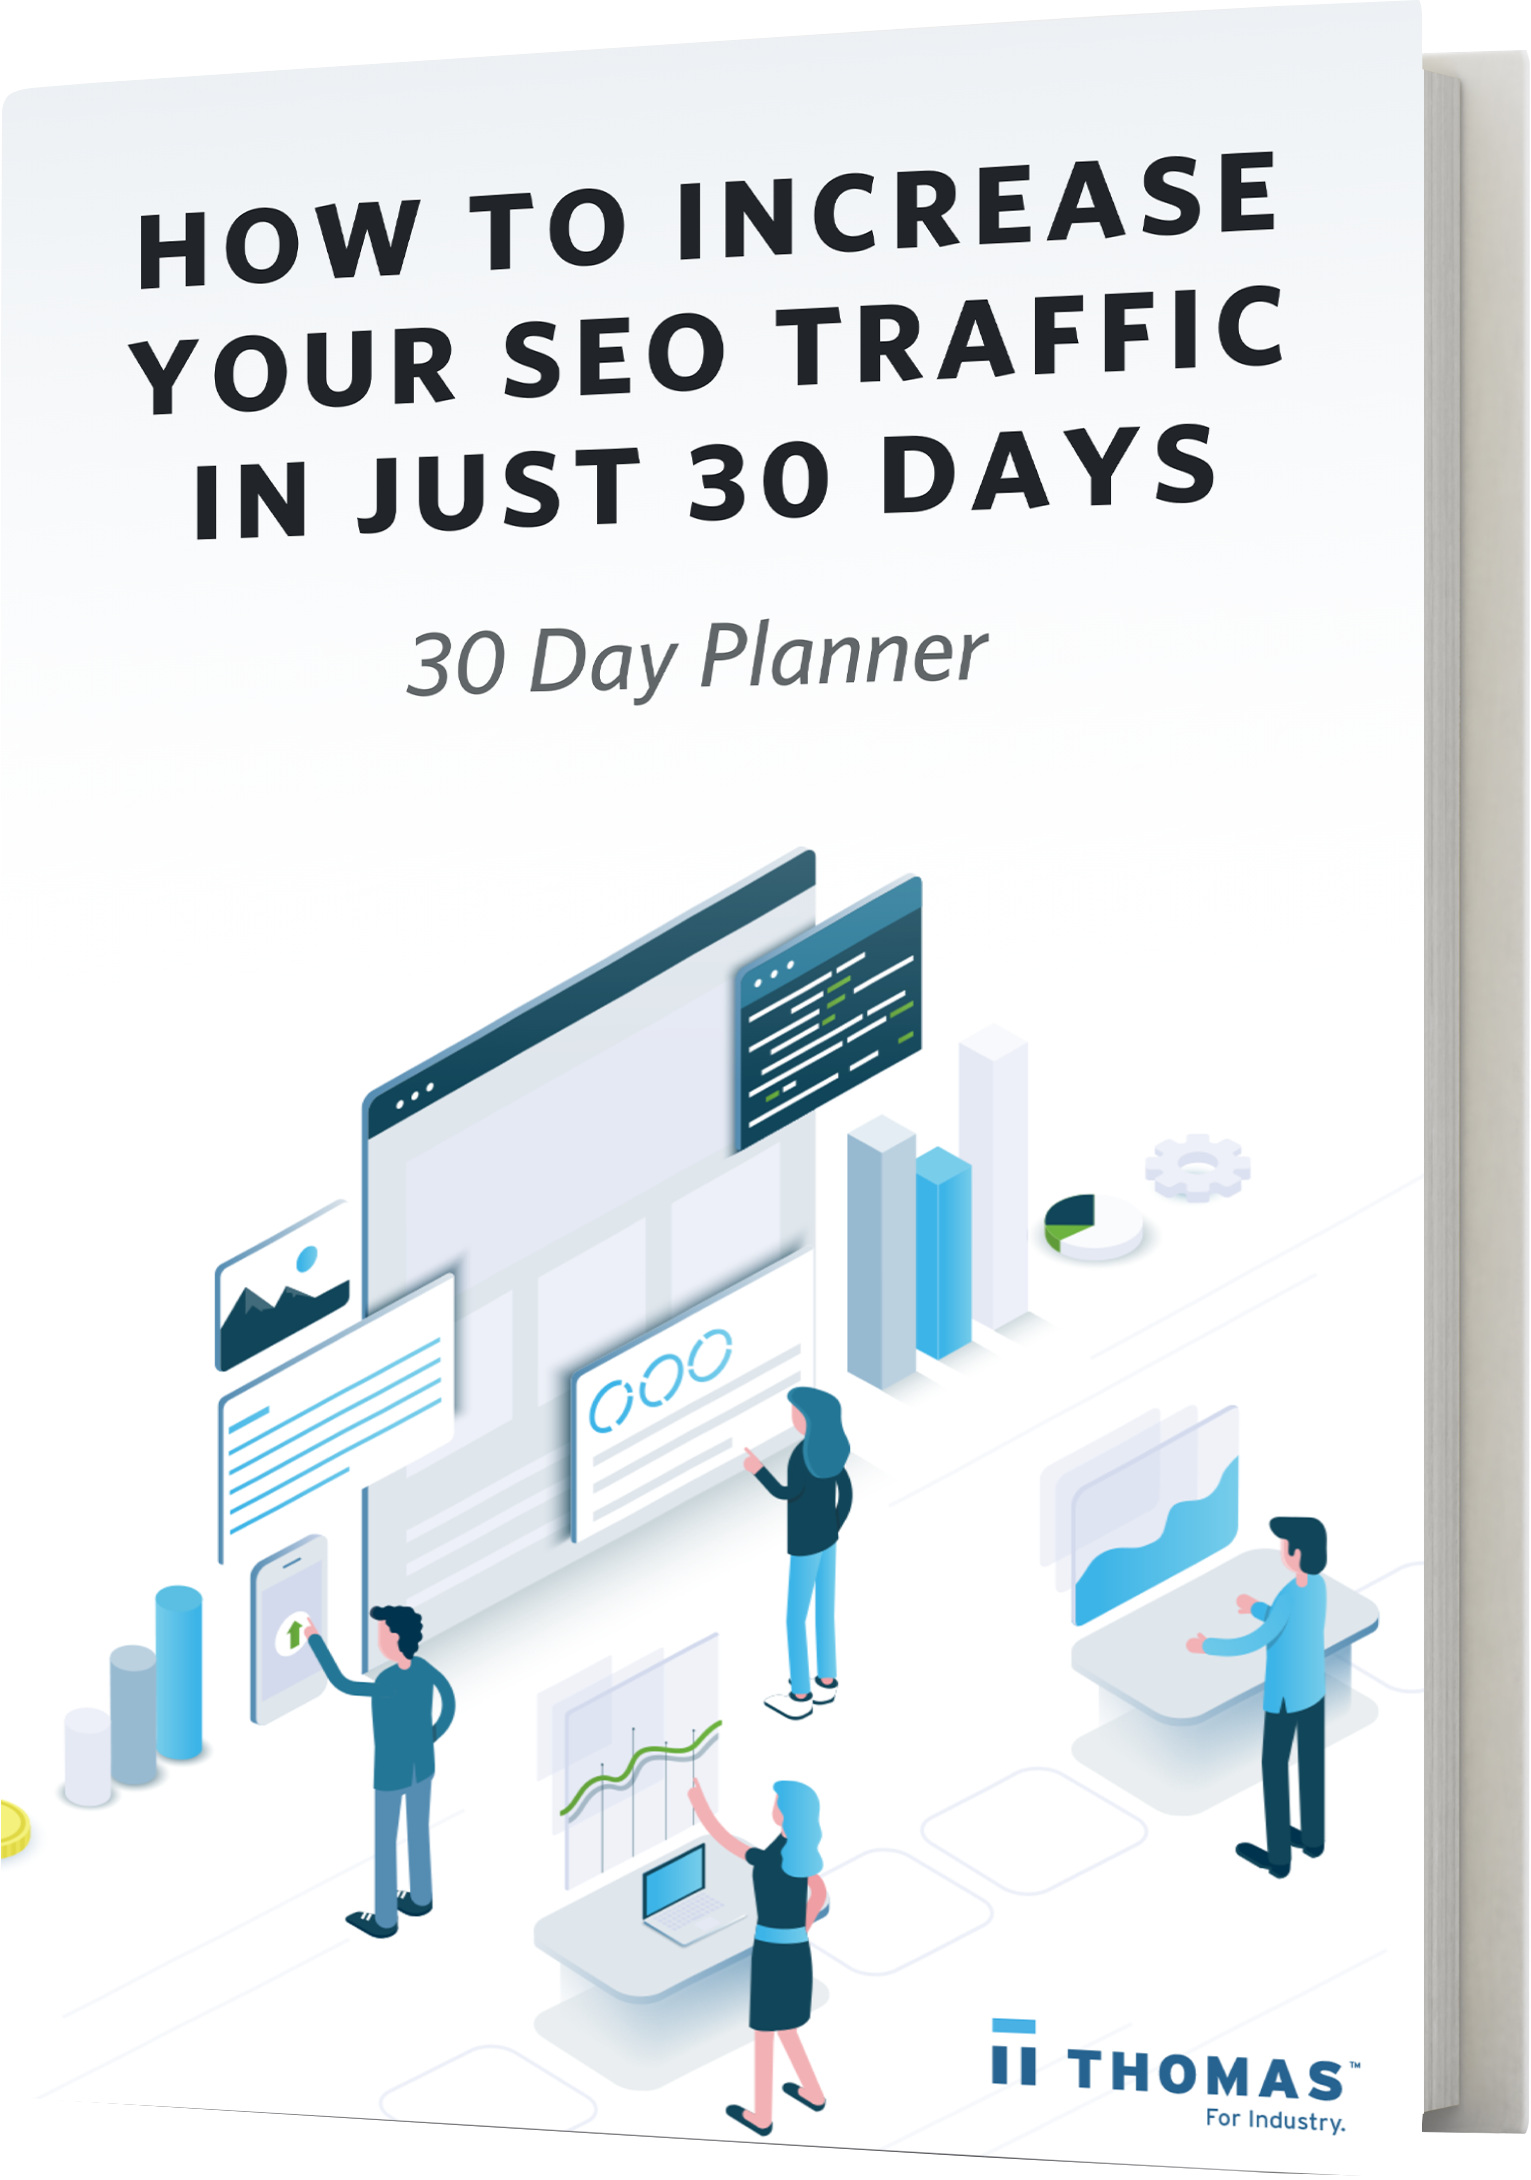 How To Increase Your SEO Traffic In Just 30 Days